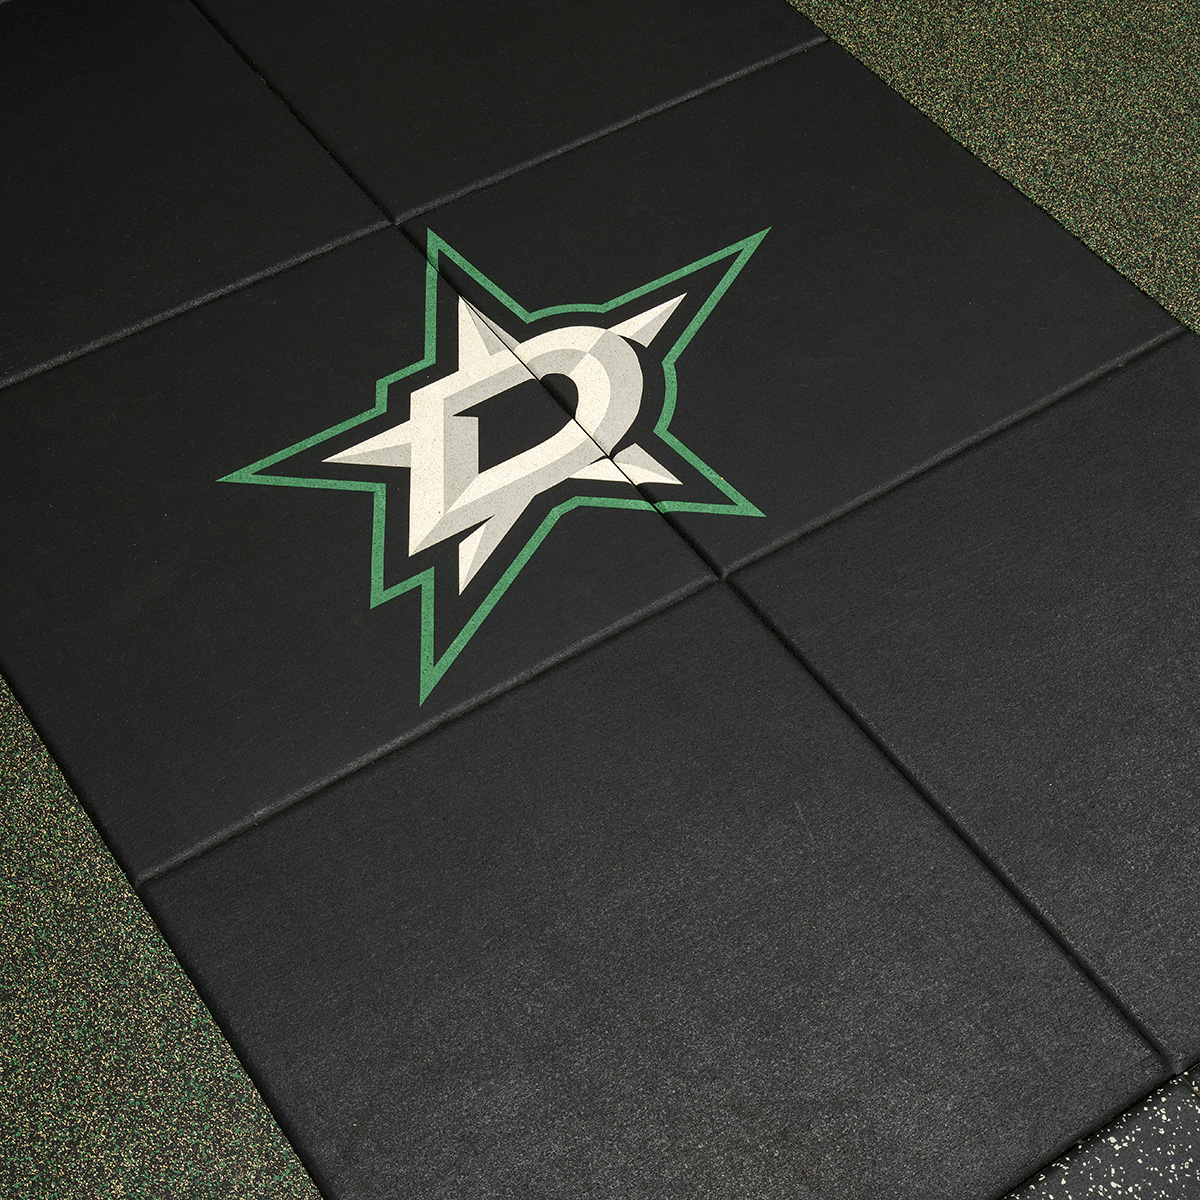 Congrats to the Dallas Stars of the NHL for advancing to the #StanleyCup Finals. Best of luck to the #DallasStars in their quest to make it back-to-back REGUPOL Champions. Last year the St. Louis Blues (then a REGUPOL AktivPro Roll #PerformanceFlooring user) won the Cup. 🏒